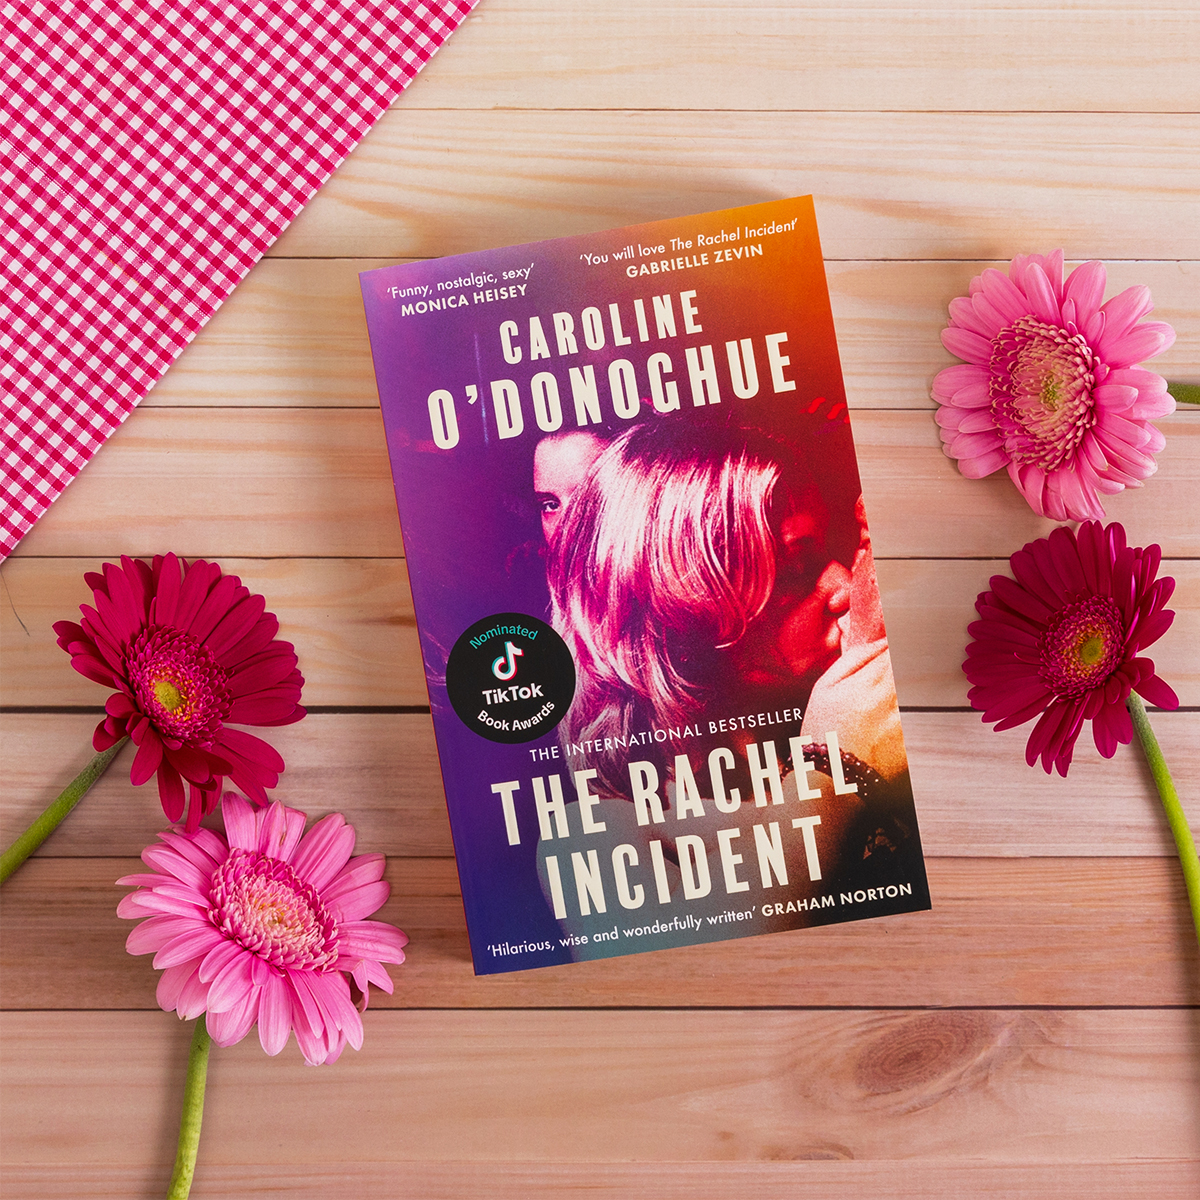 Everyone in Cork remembers the Rachel Incident.  But what really happened? It's simple.  It's complicated. It's the story of Rachel and James, who spent one unforgettable year screwing up and growing up. #TheRachelIncident is out in PB on 6 June: brnw.ch/21wK99Q